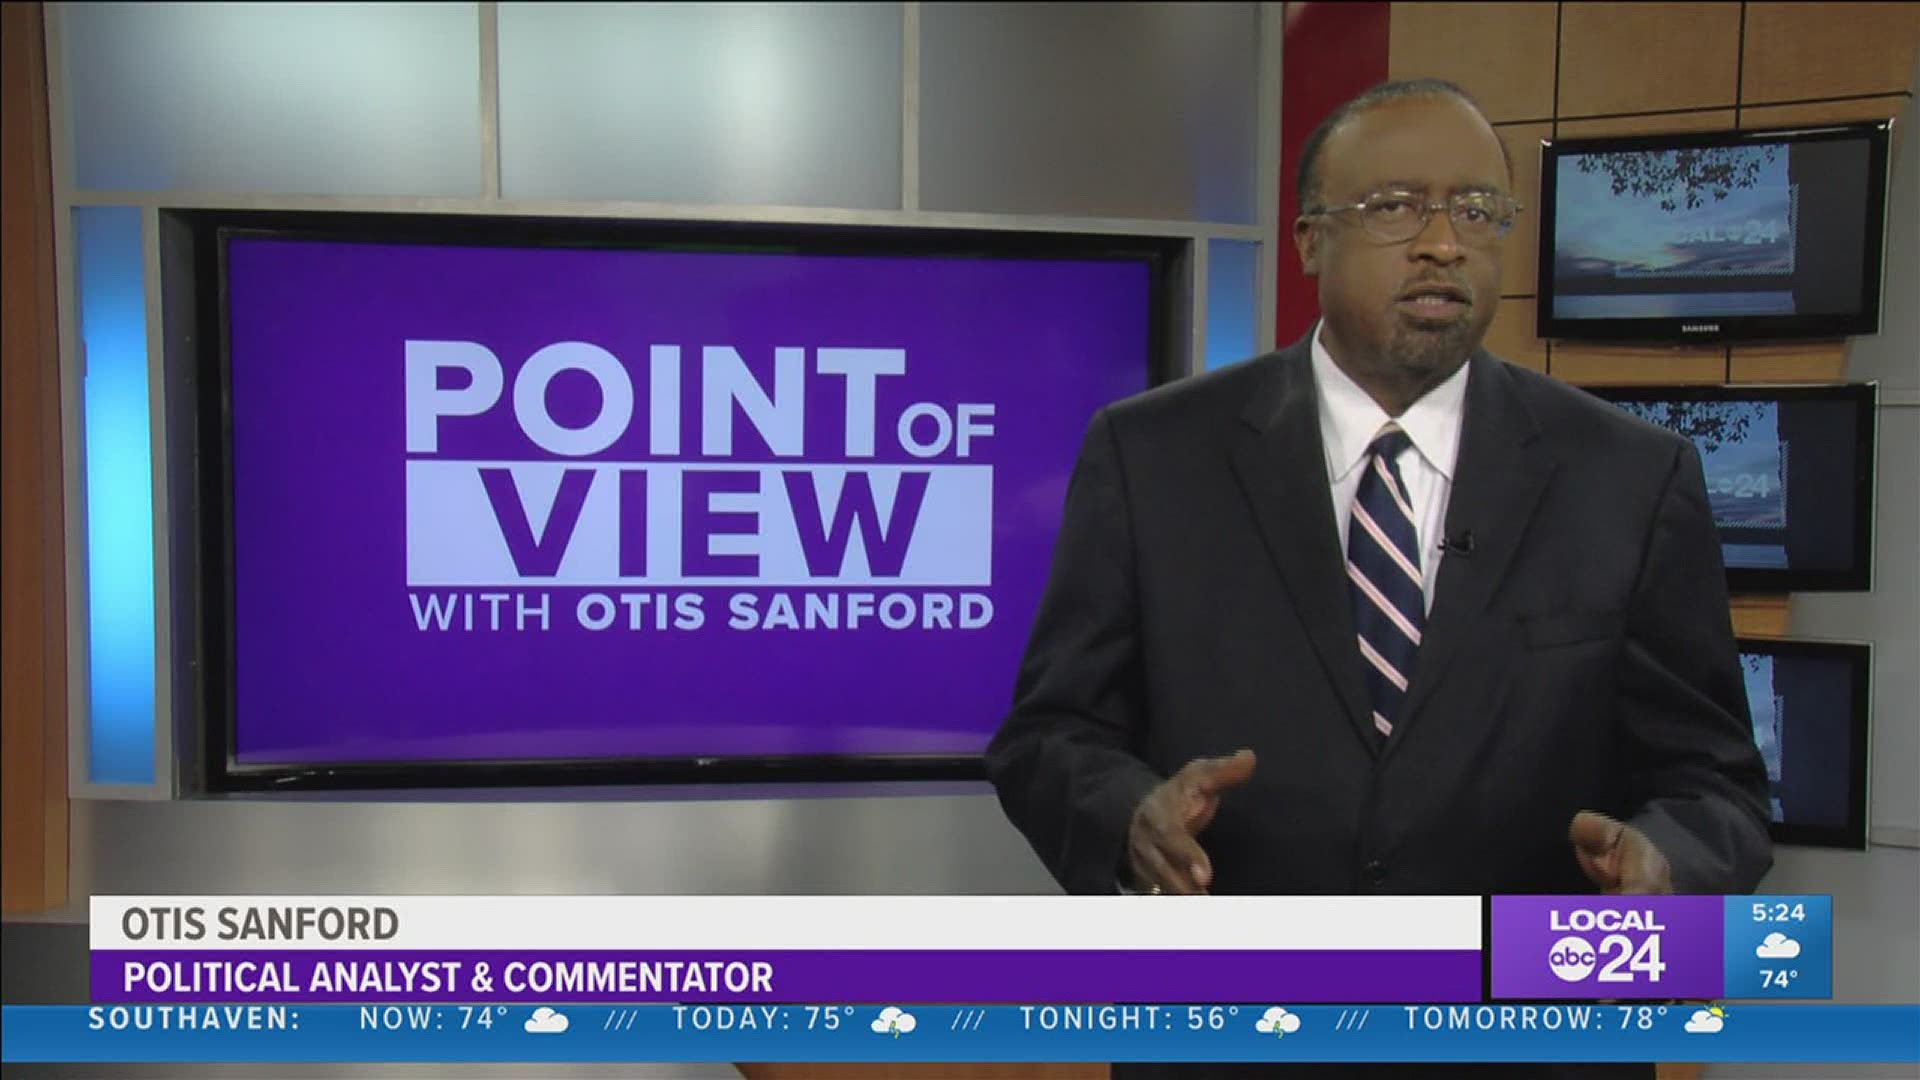 Local 24 News political analyst and commentator Otis Sanford shares his point of view on a town hall with the mayor’s pick for Memphis Police Director.